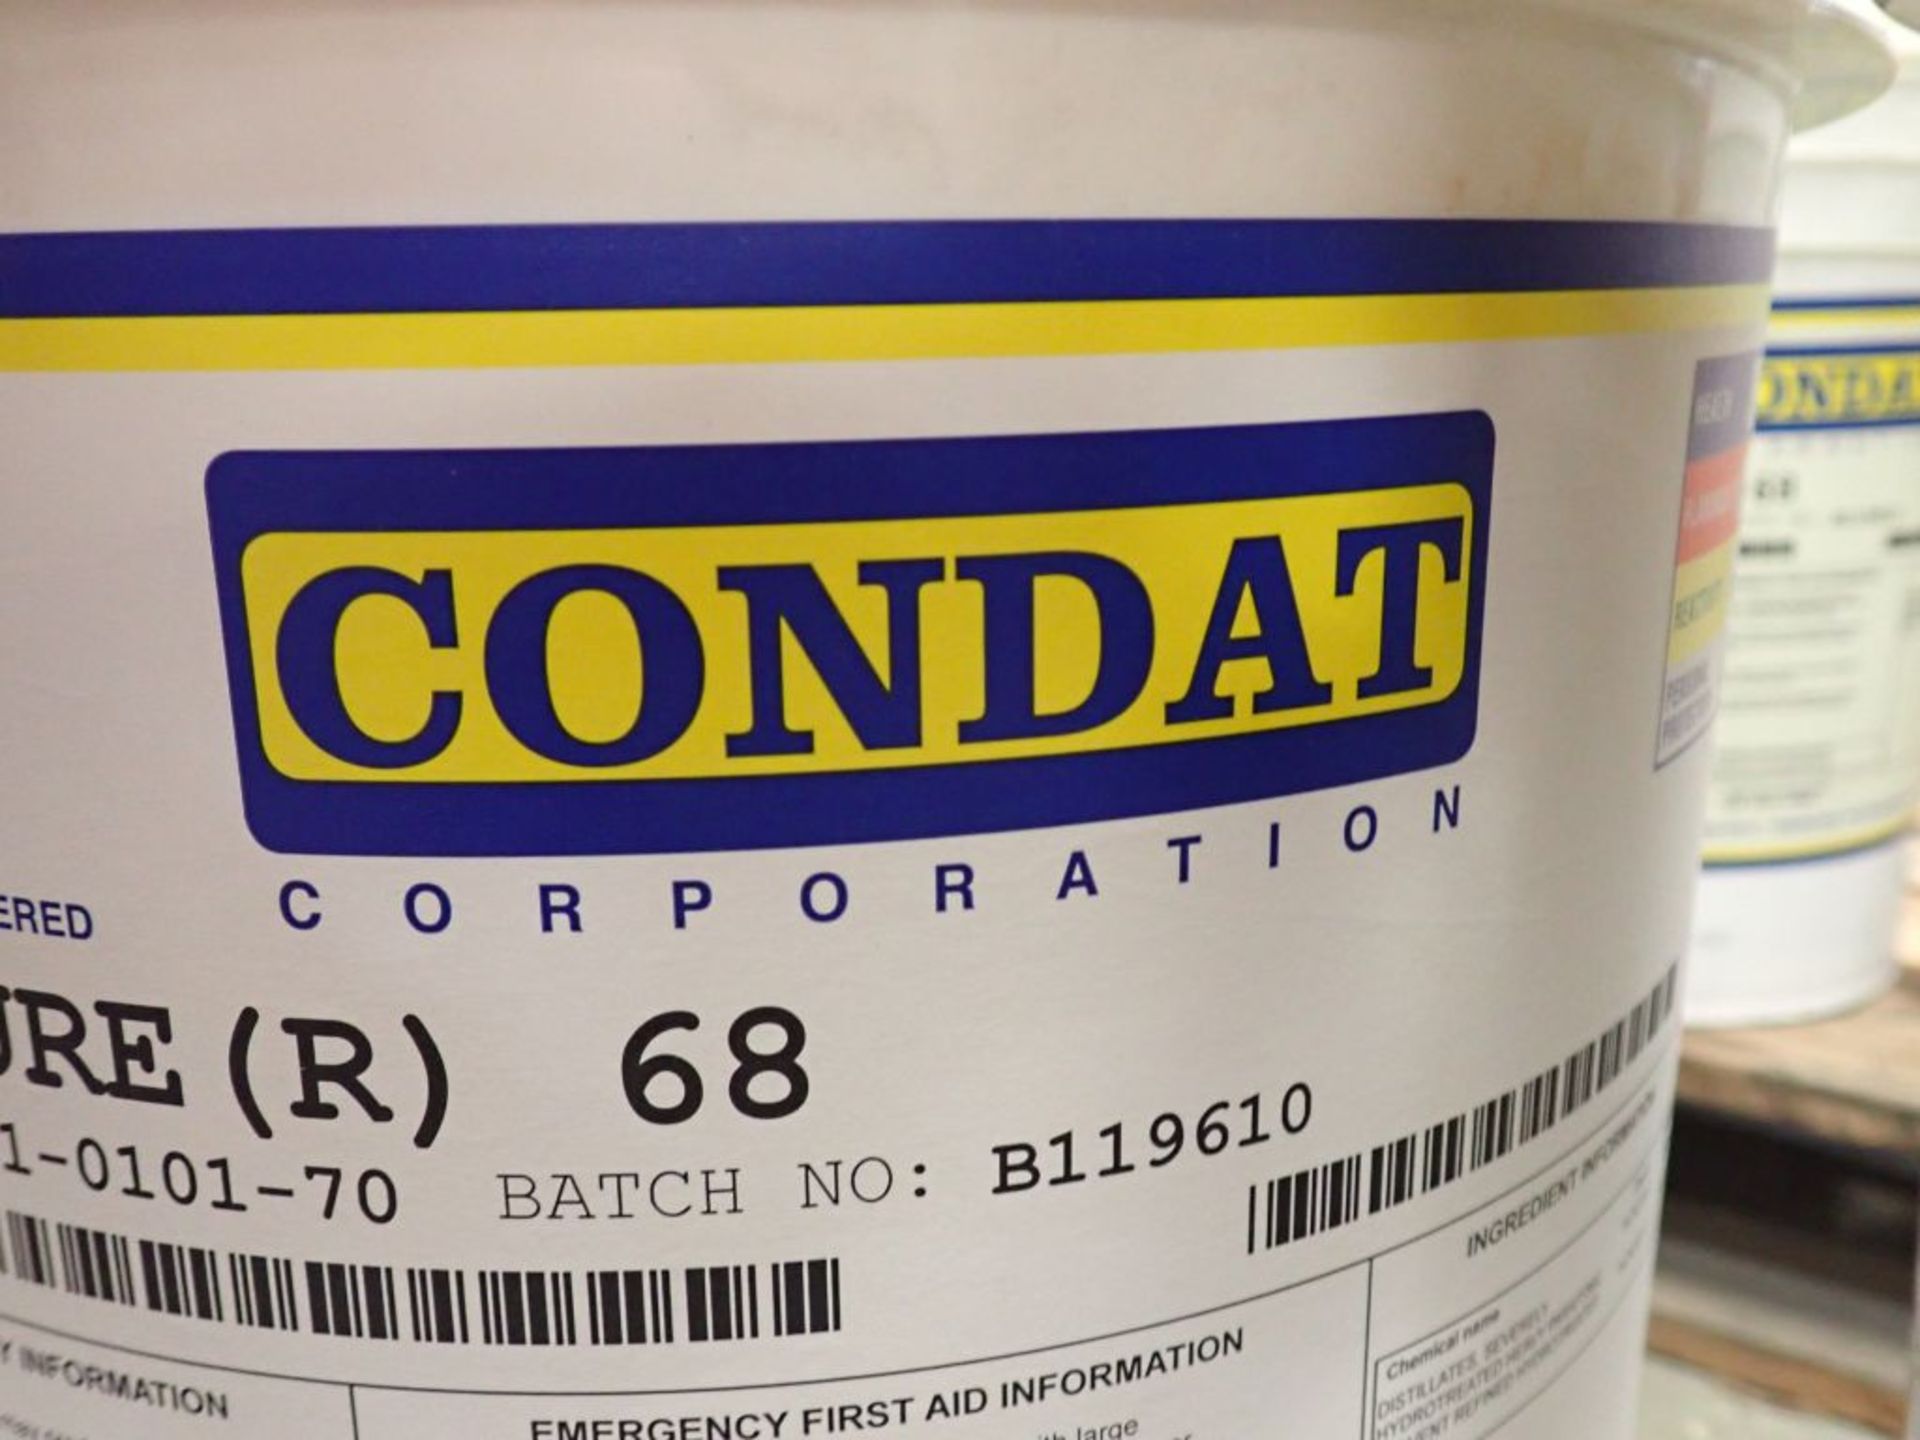 Lot of (4) Containers of 5-Gallon Condat Wire Lubricant | Item Key: 041-0191-70; New Surplus - Image 9 of 12